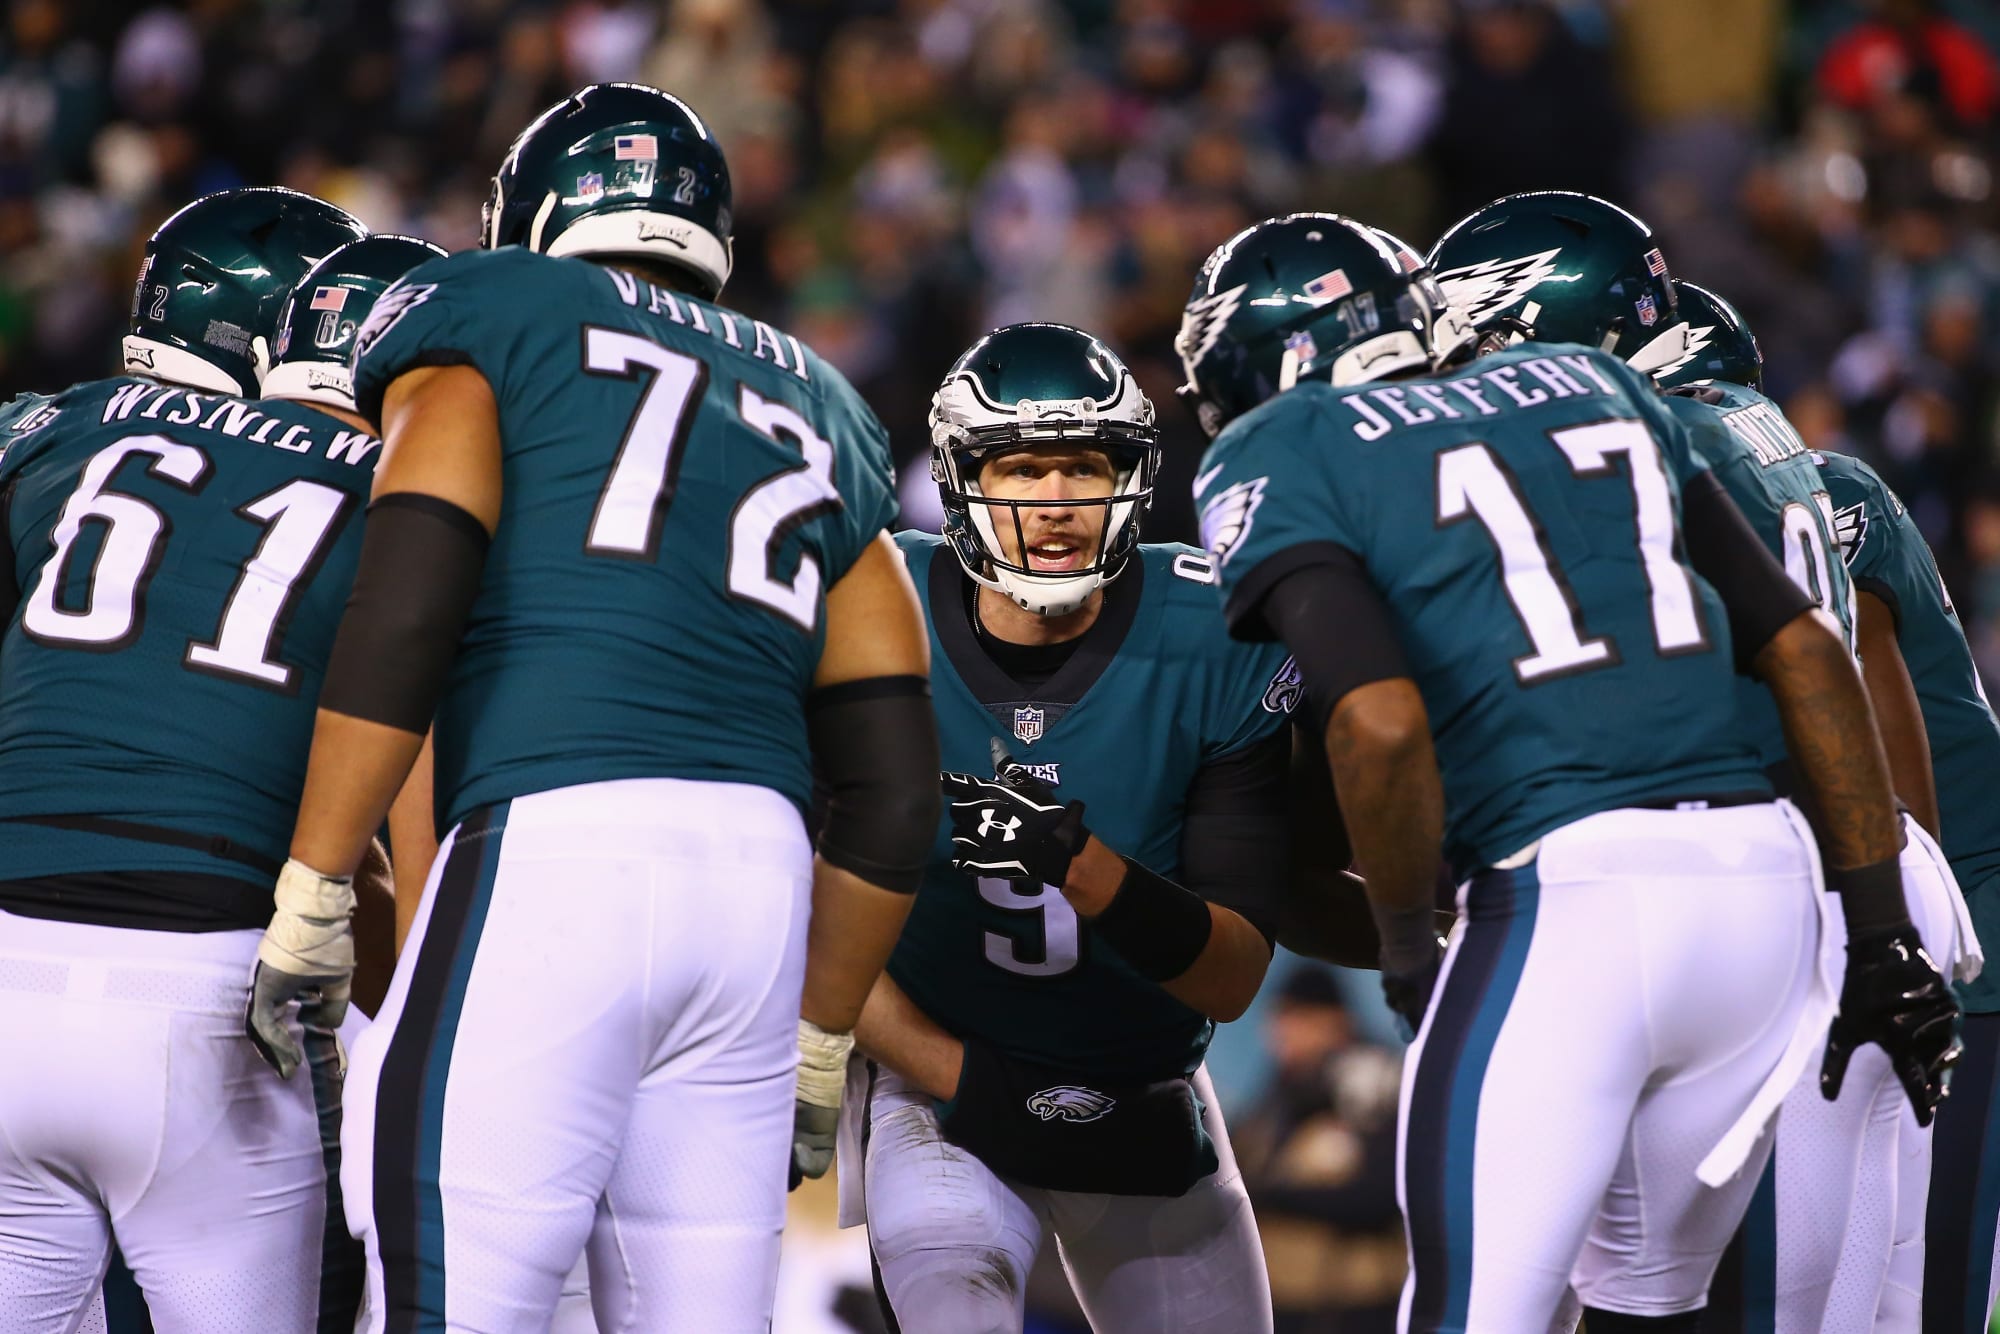 Philadelphia Eagles NFC Championship bound after win over Falcons